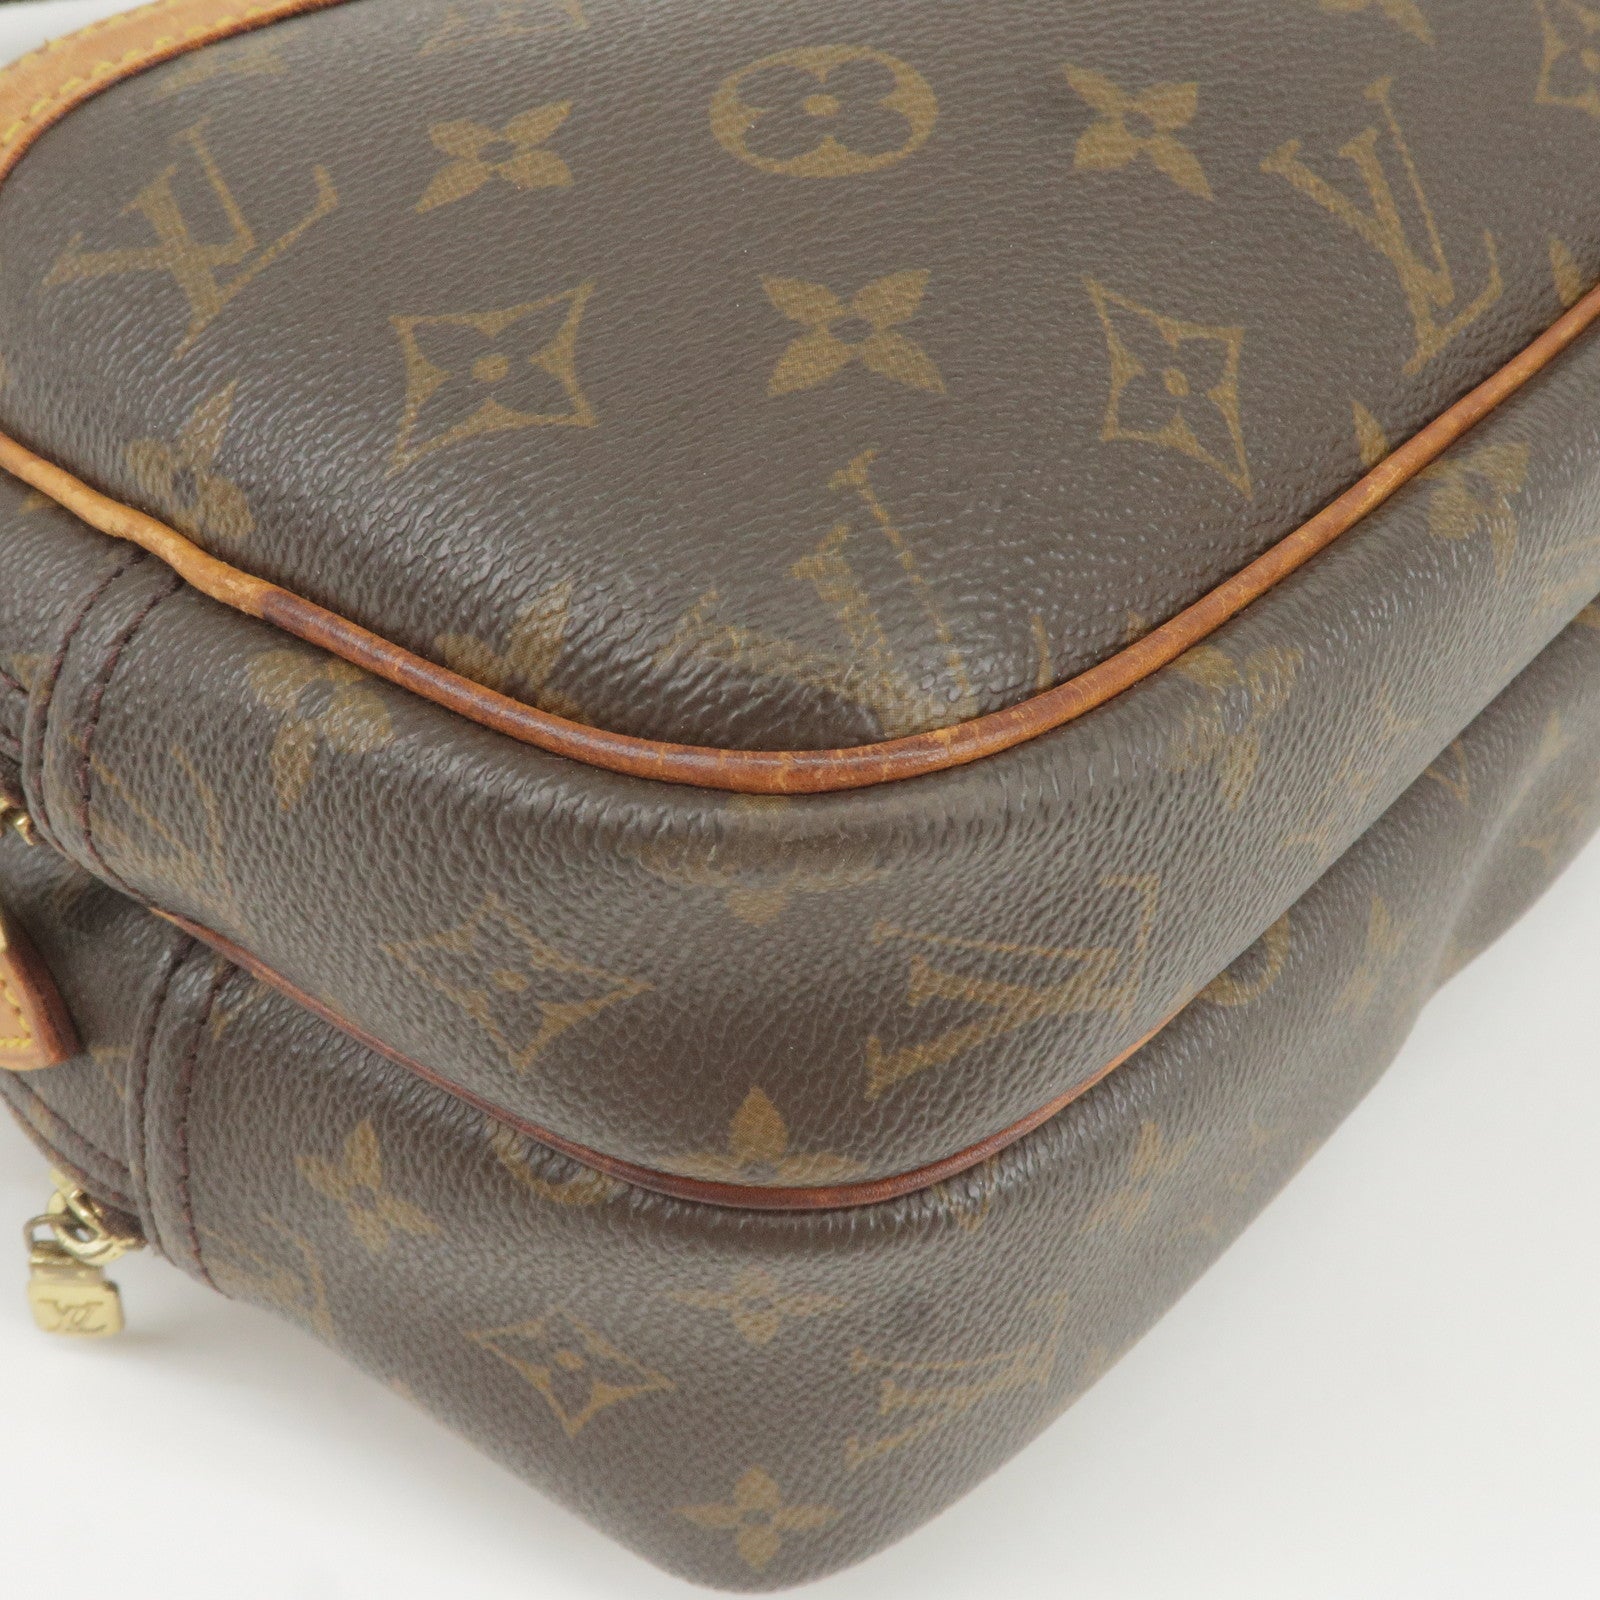 UPDATED REVIEW - Louis Vuitton Reporter PM 